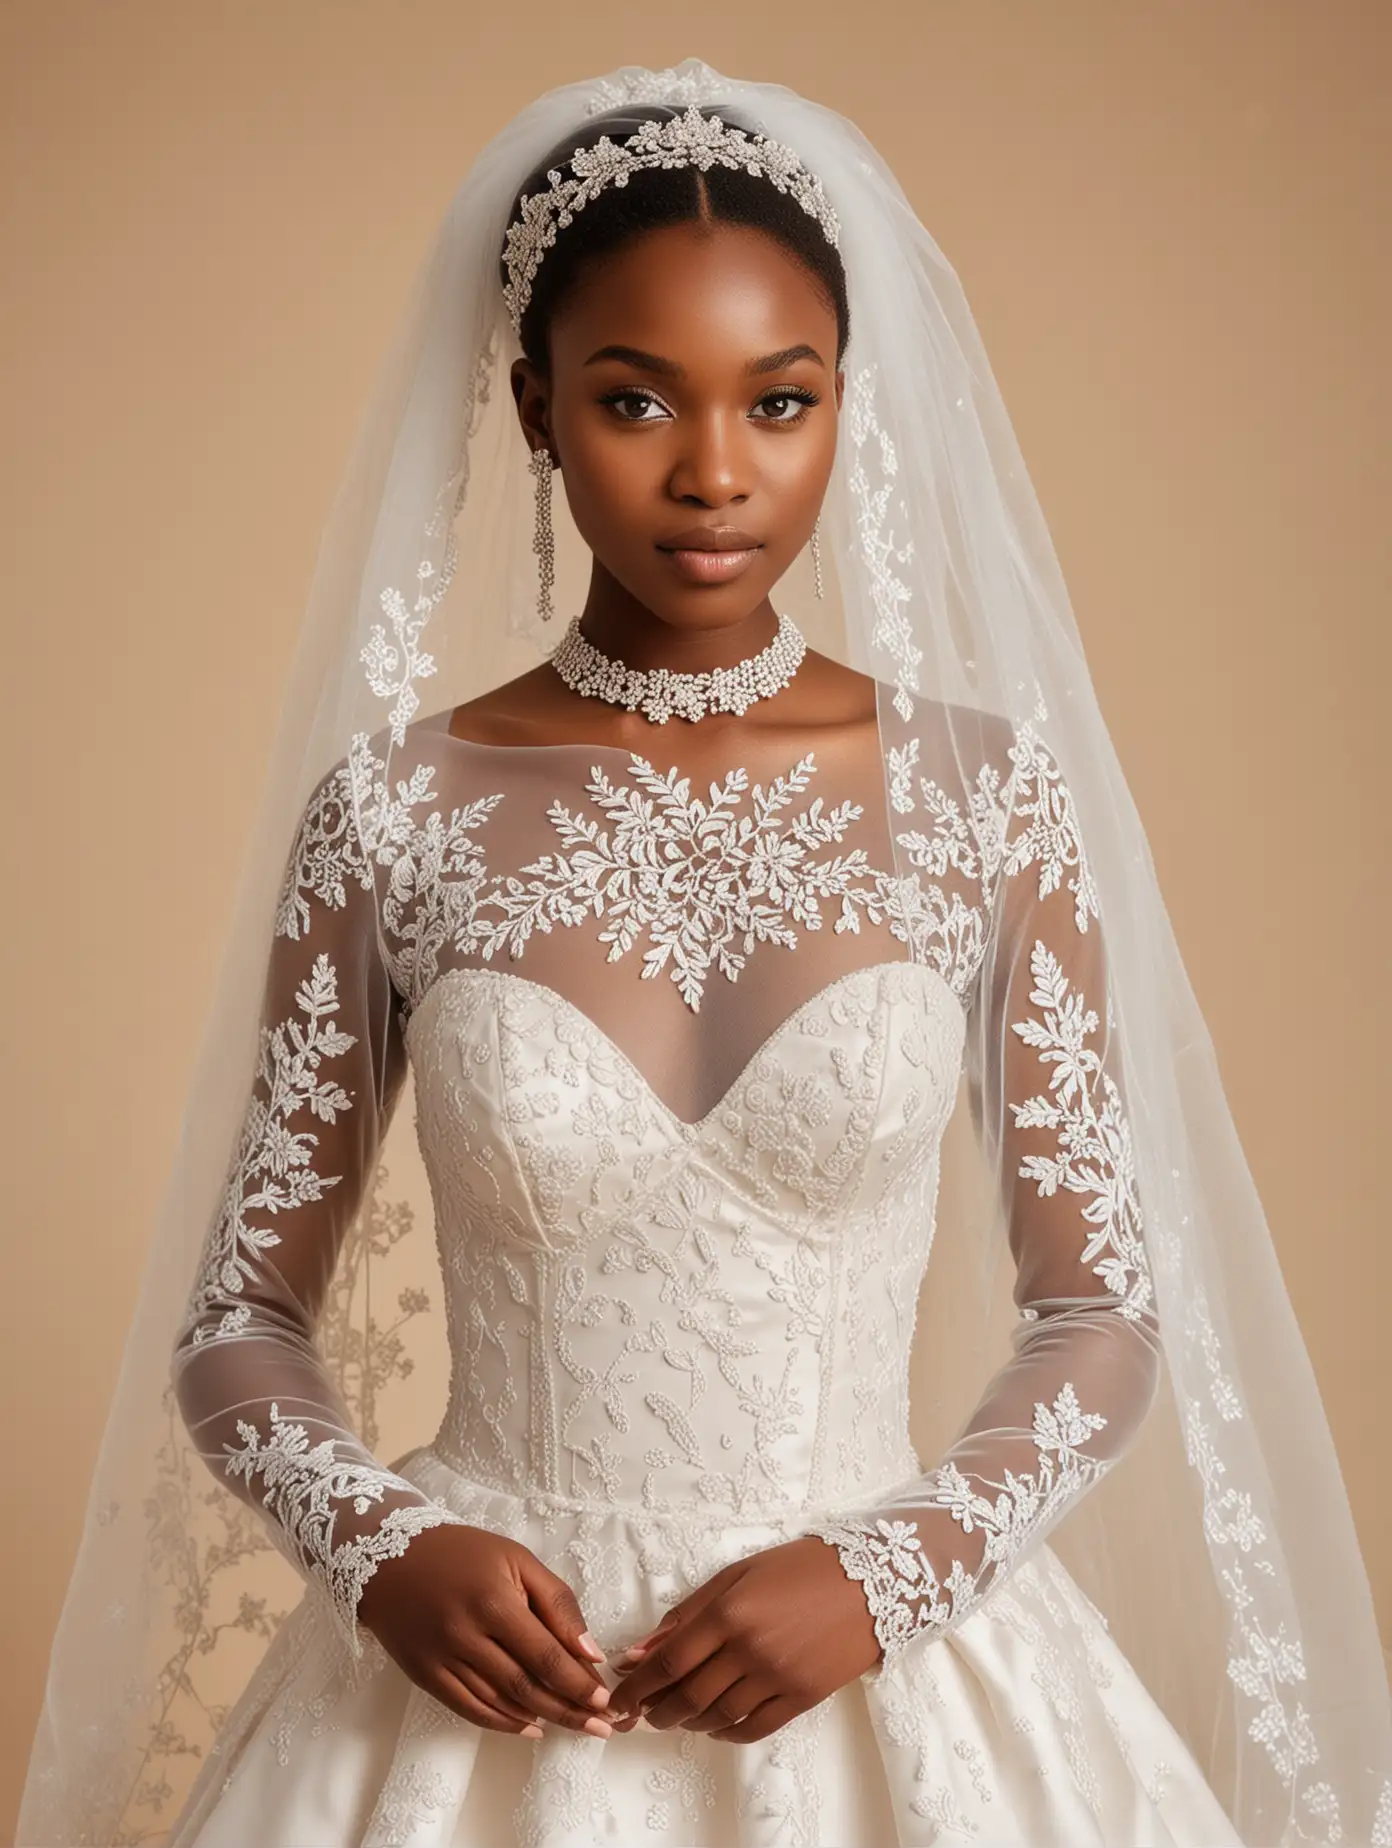 African Bride in Elegant Wedding Dress Capturing Intricate Lace and Satin Details